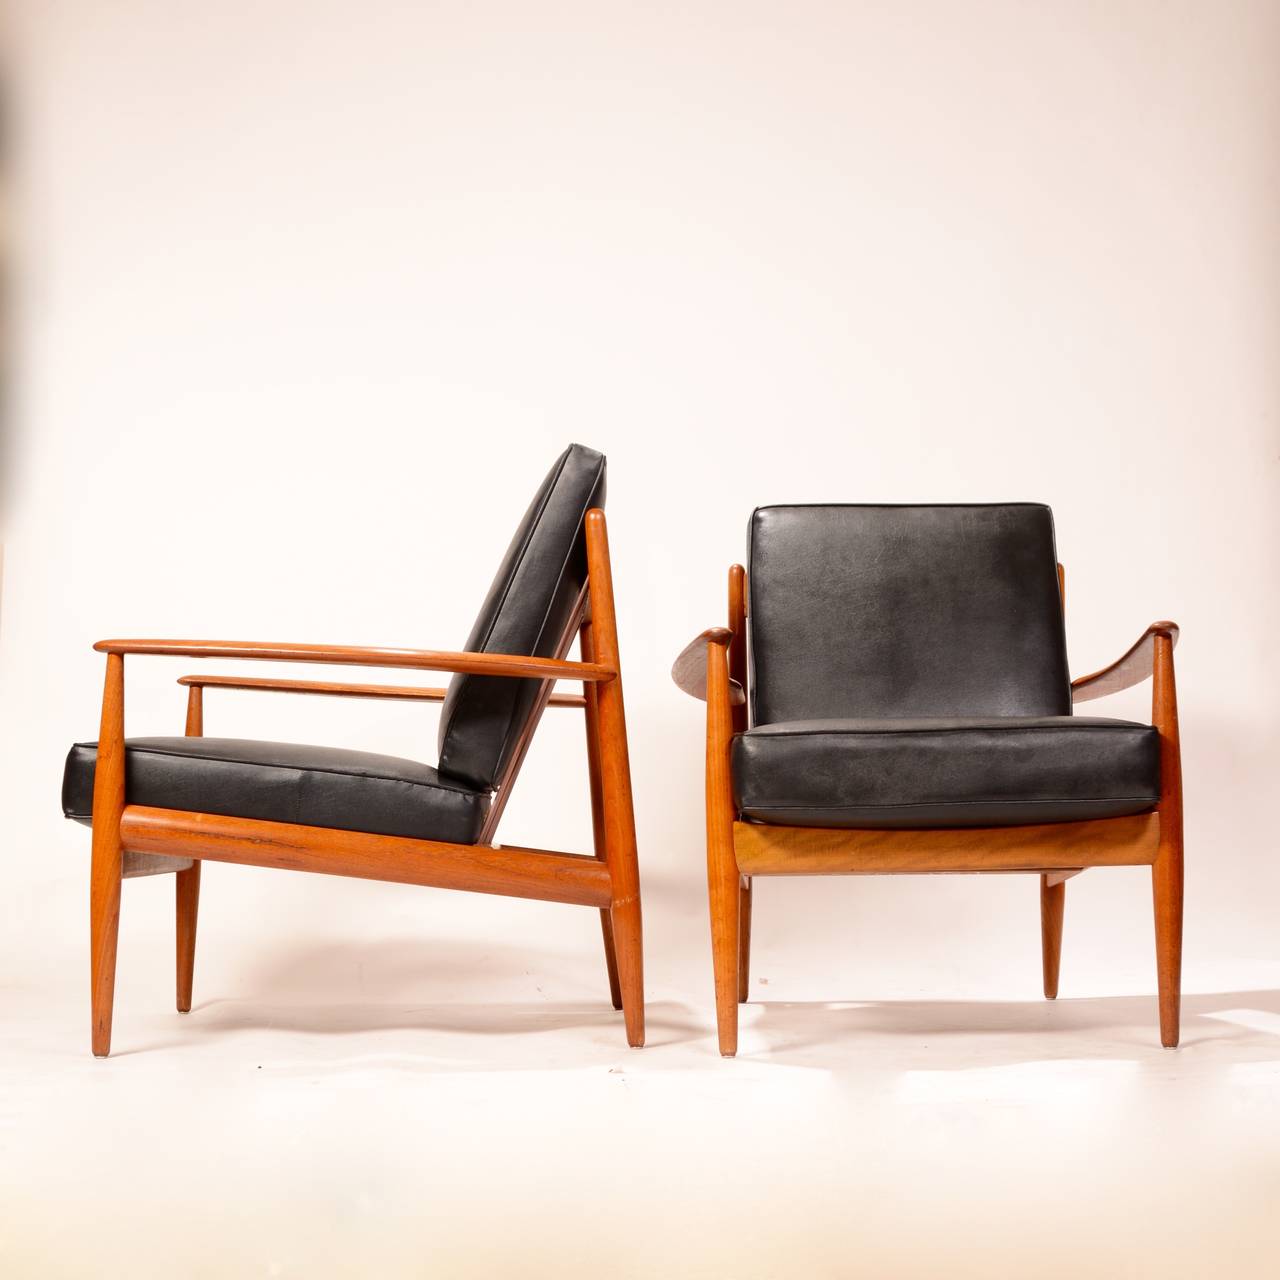 Scandinavian Modern Early Grete Jalk Teak Lounge Chairs with Banding Backs and Seats